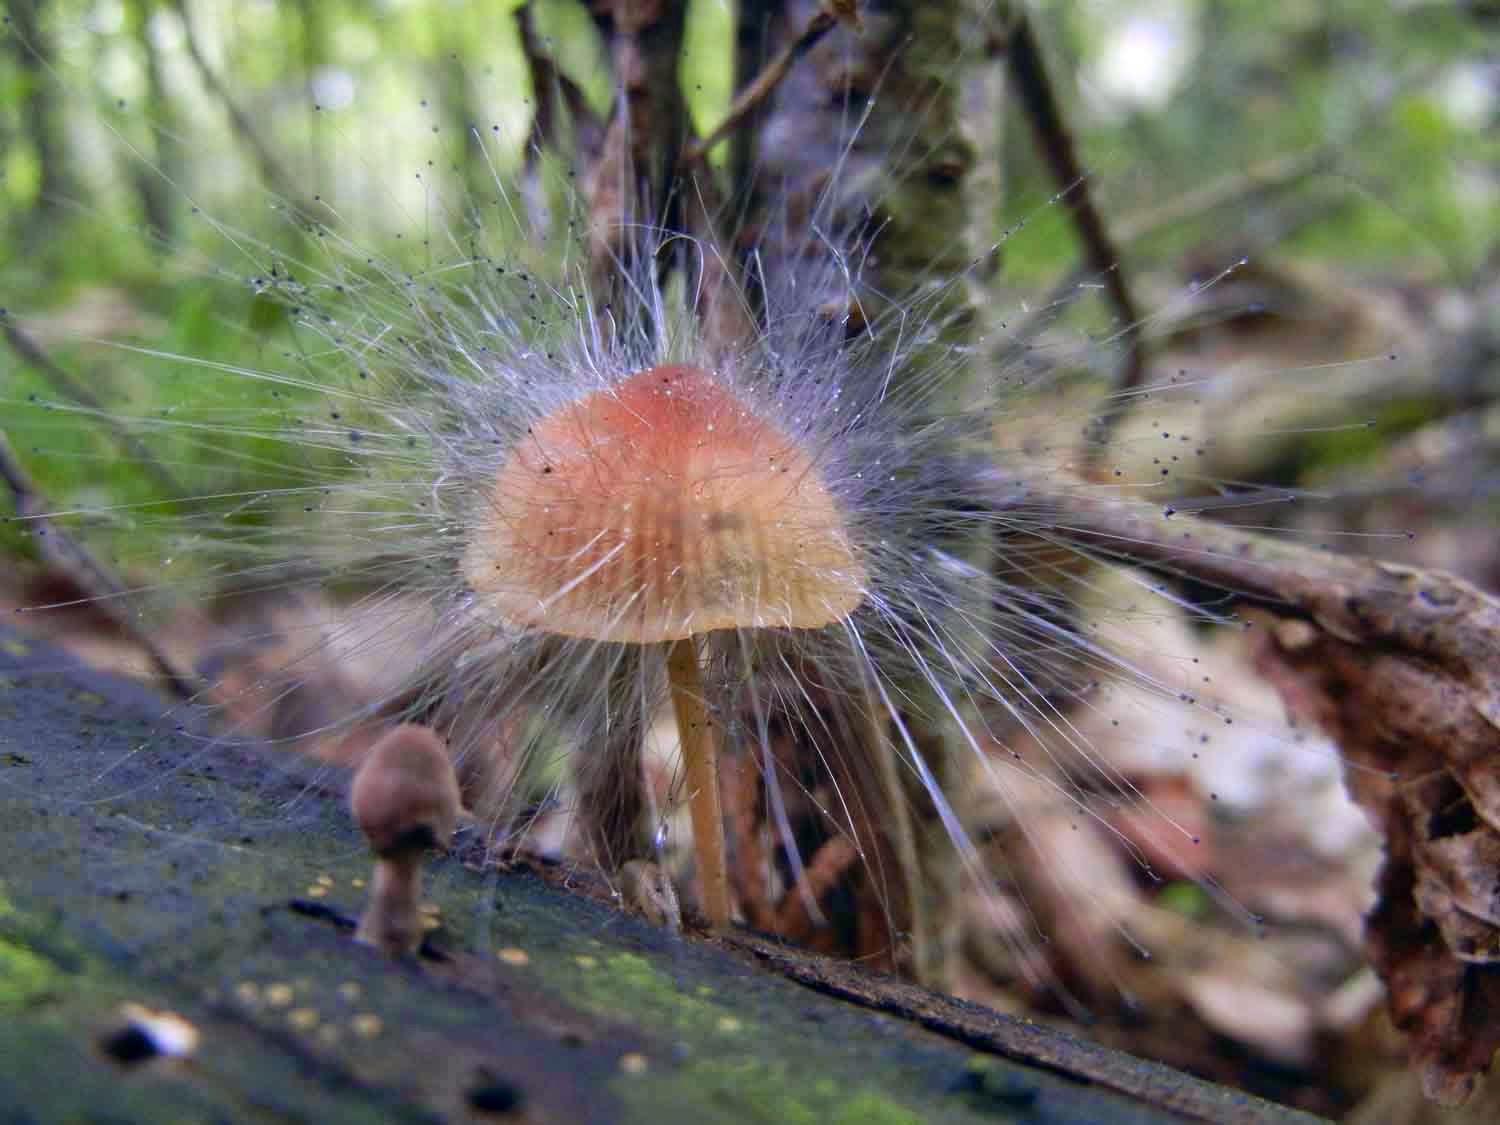 This Mushroom-Shaped Hair Catcher Is So Gross, But Really Satisfying